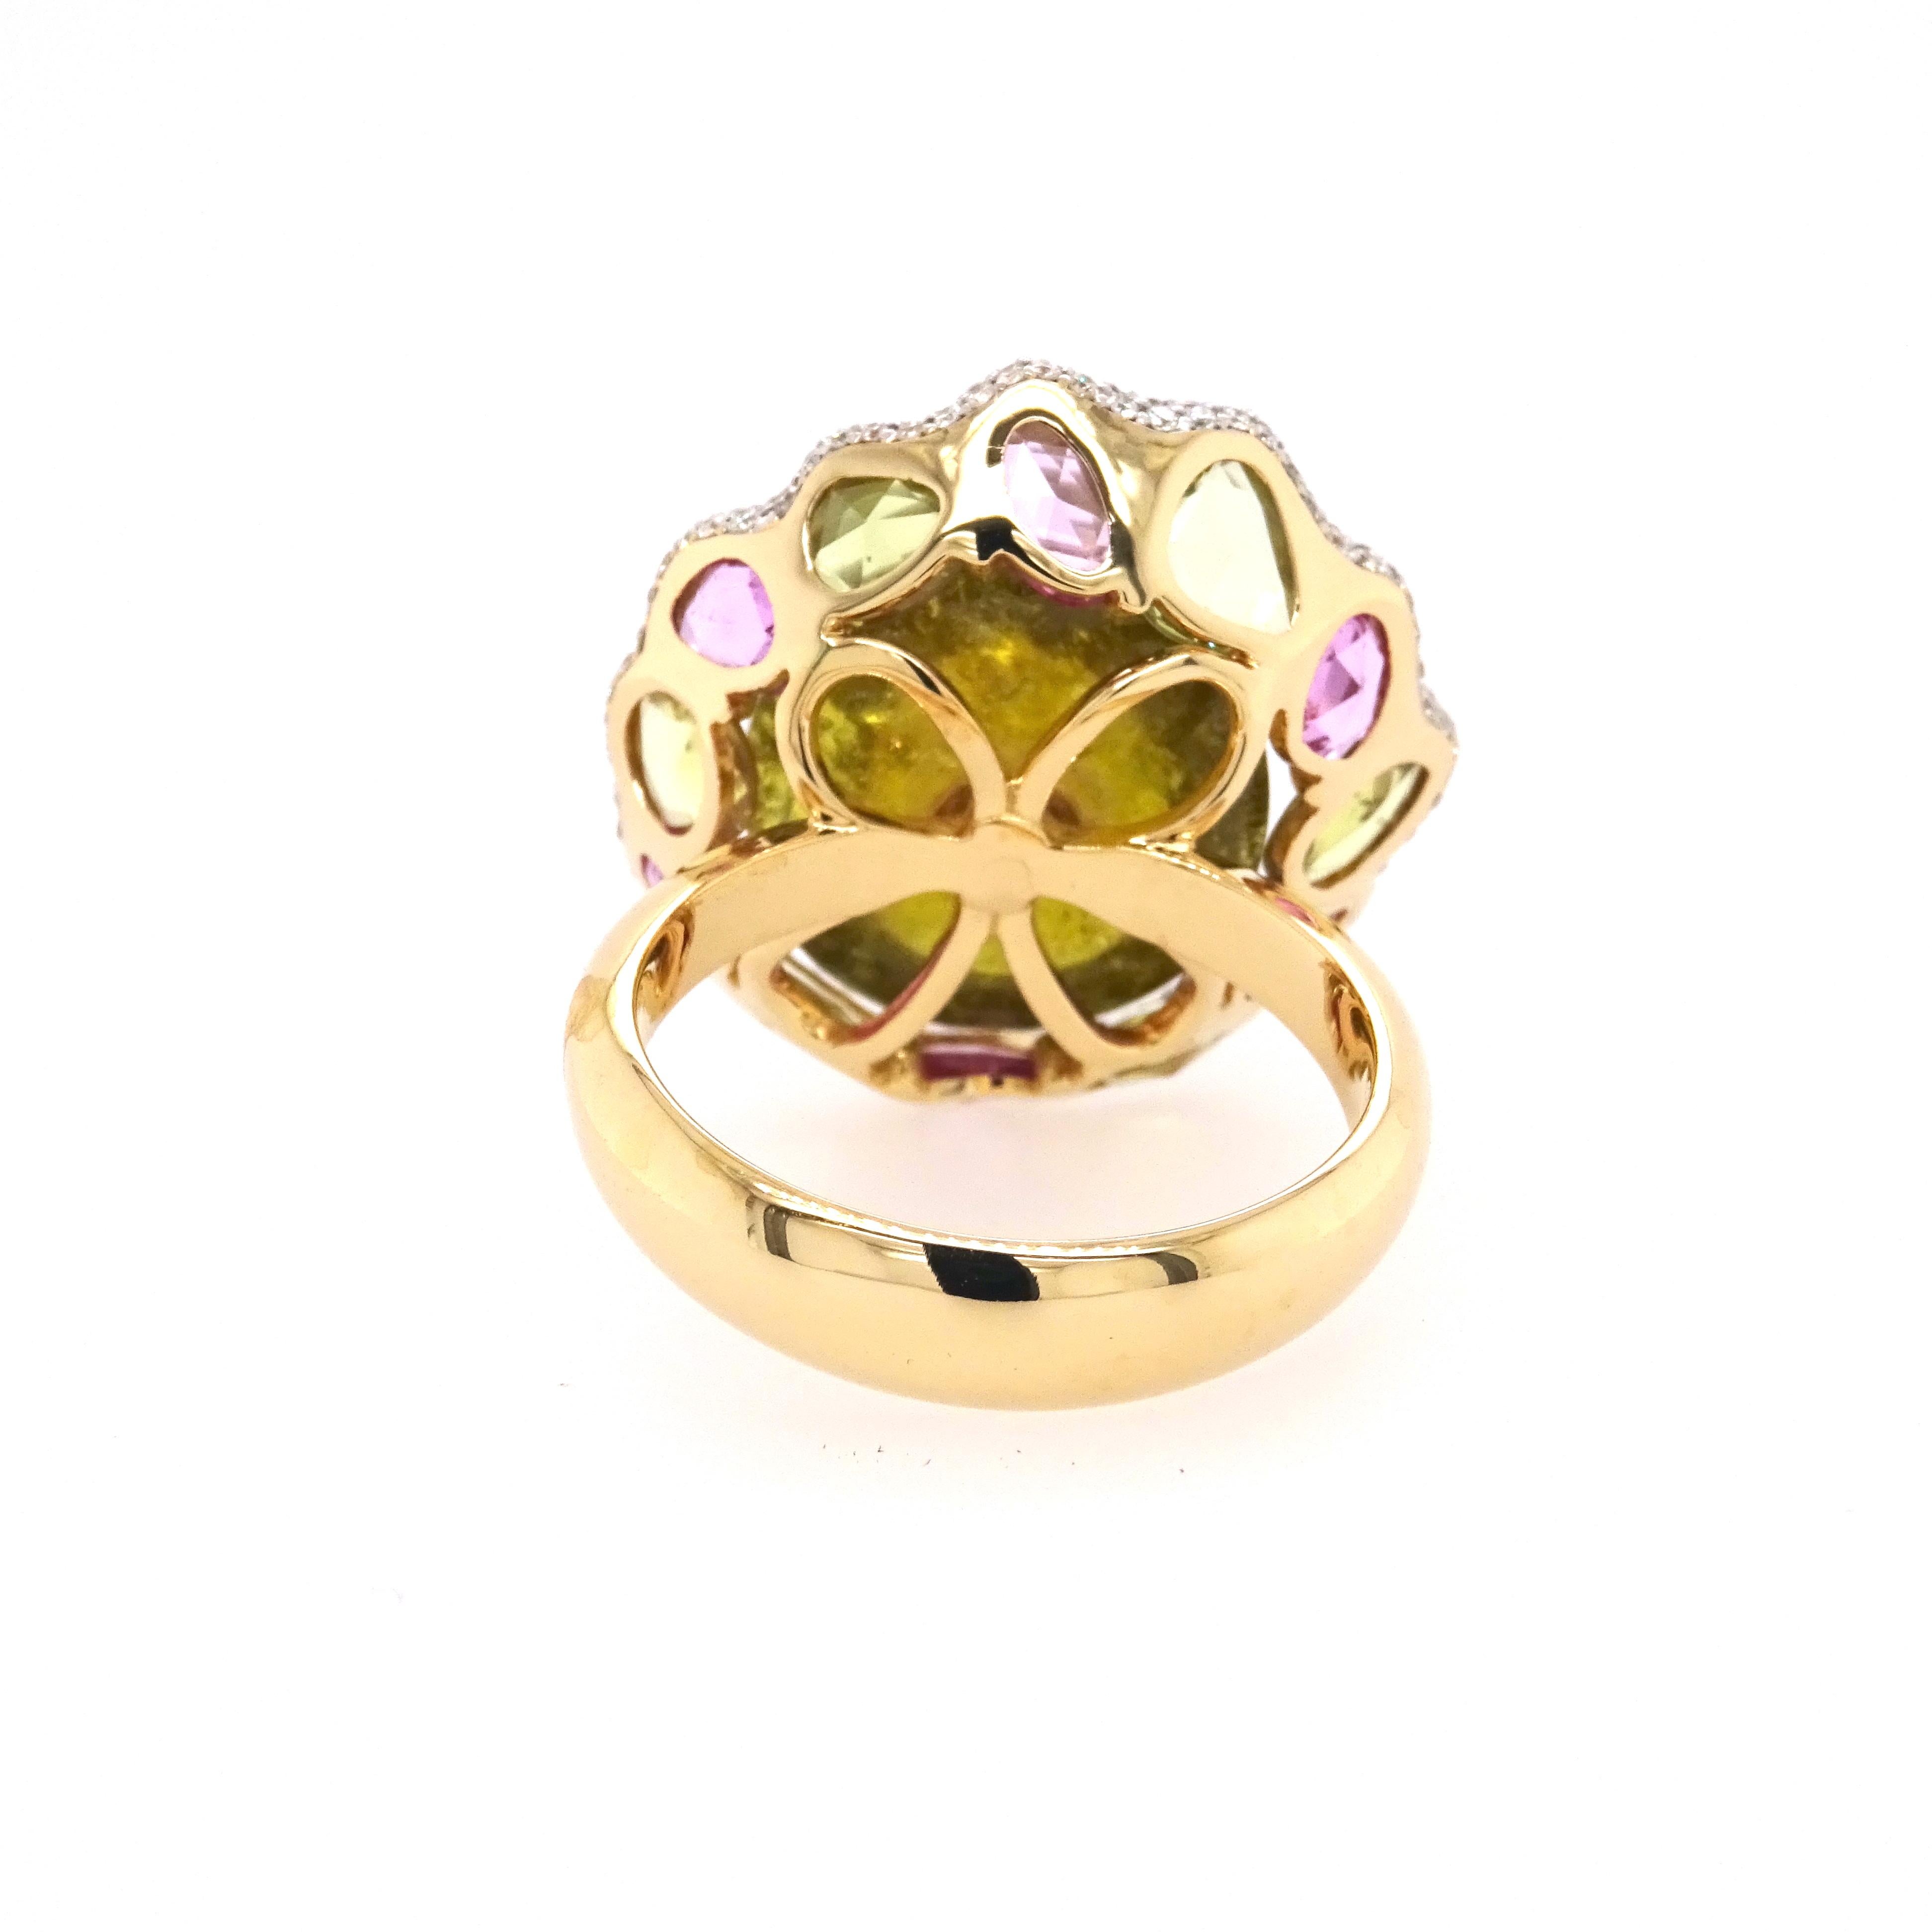 Women's 18K Gold Ring with White Diamonds, Fancy Sapphires and a Centre Tourmaline For Sale